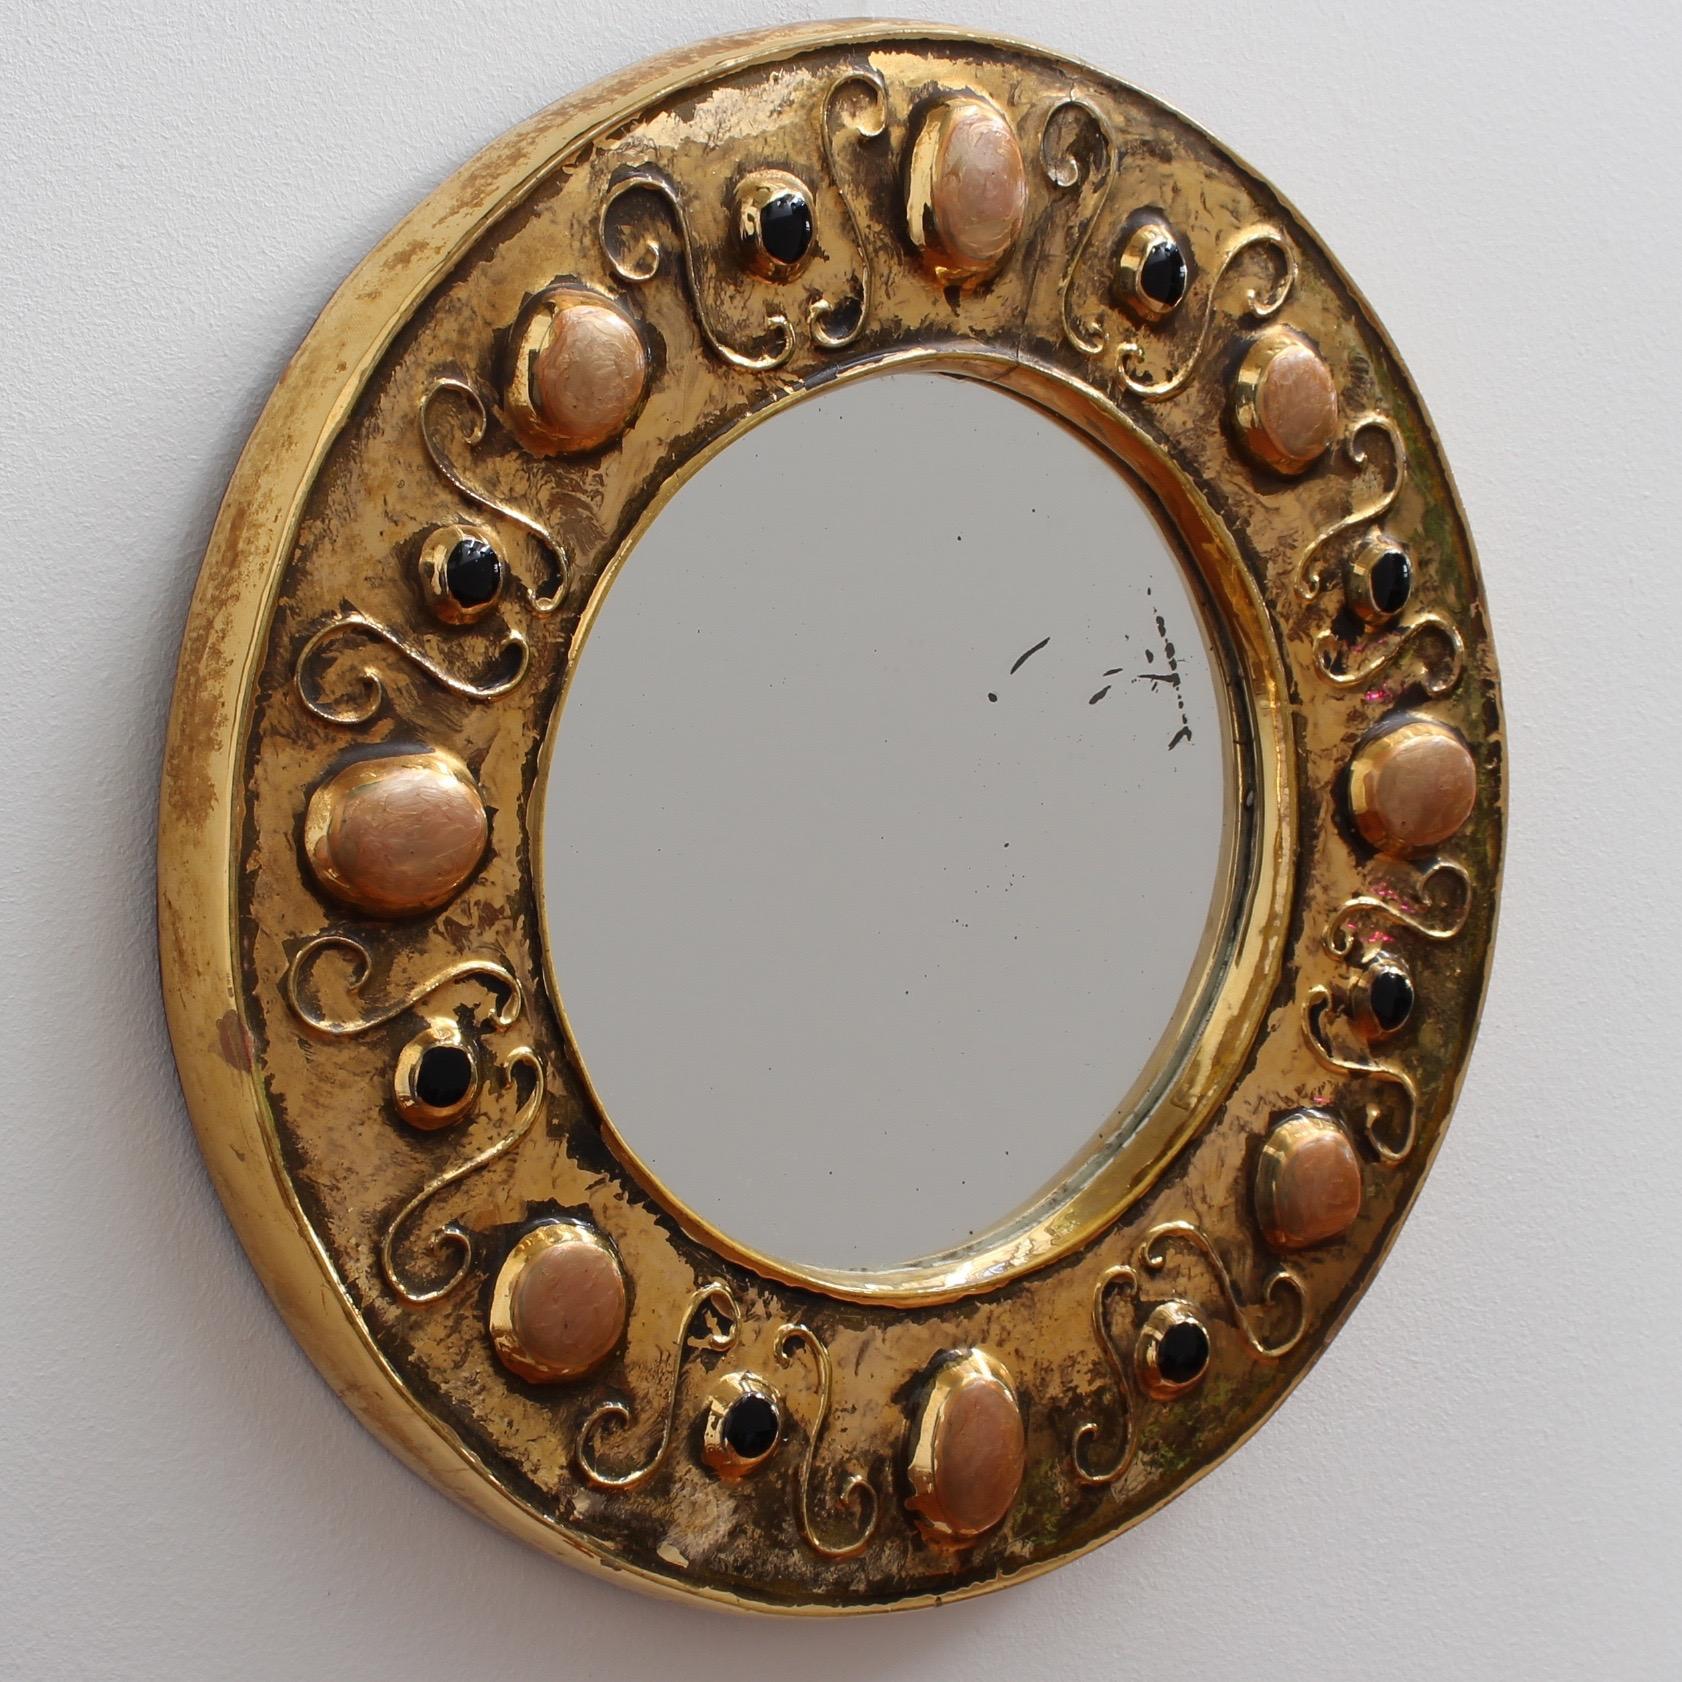 Modern Gilded Ceramic Decorative Wall Mirror by François Lembo, circa 1960s-1970s